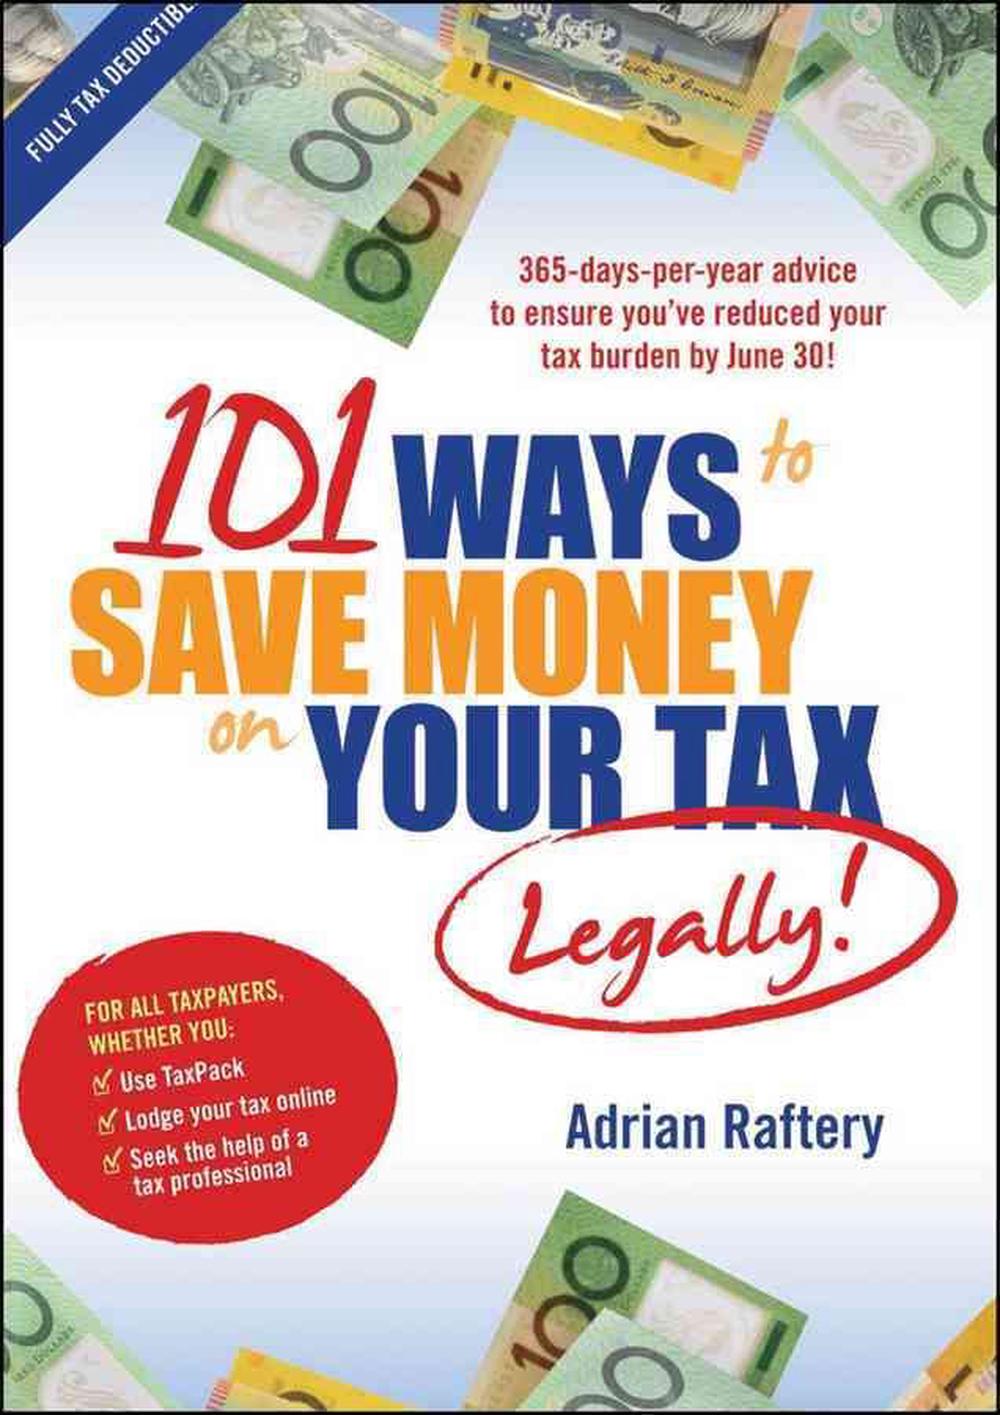 101 Ways to Save Money on Your Tax Legally! by Adrian Raftery